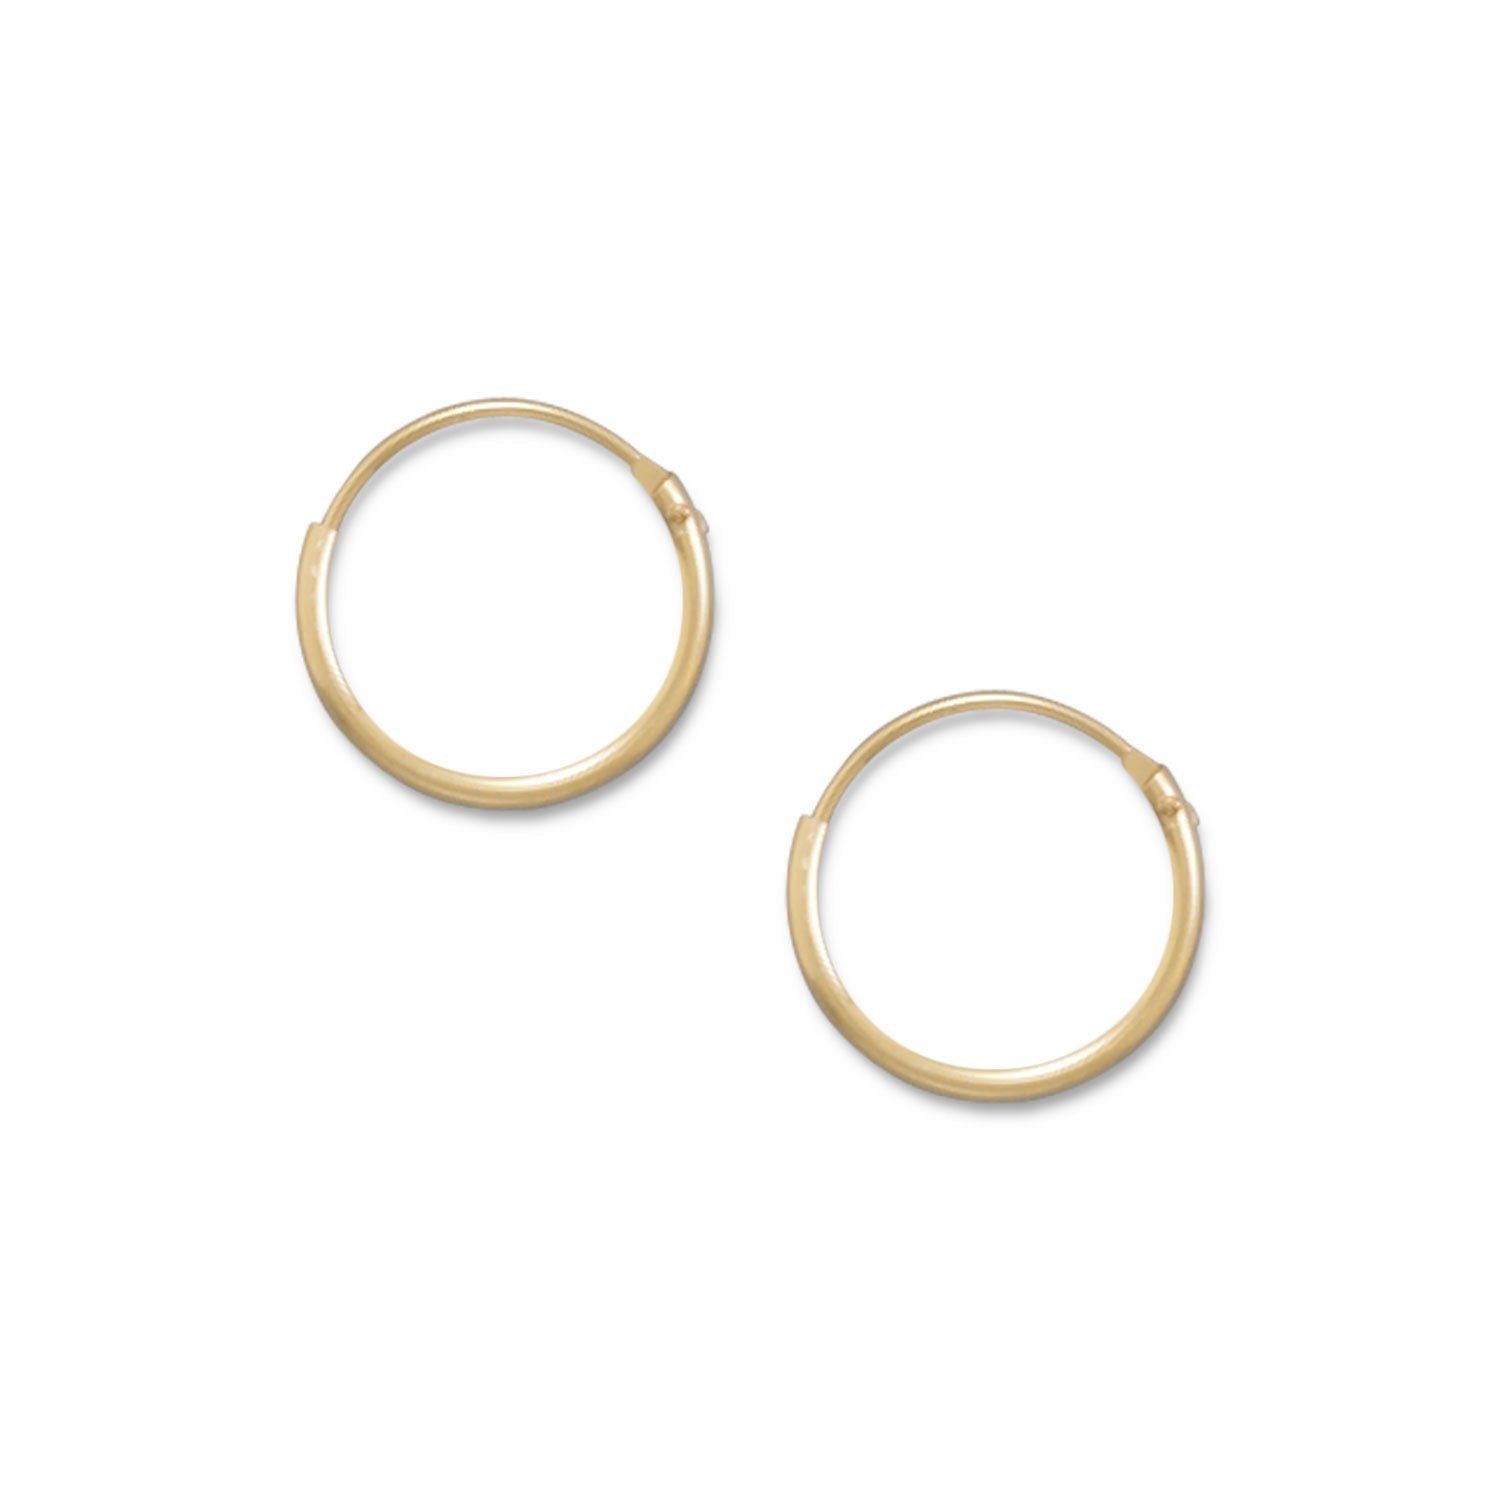 14/20 Gold Filled 1mm x 12mm Hoops